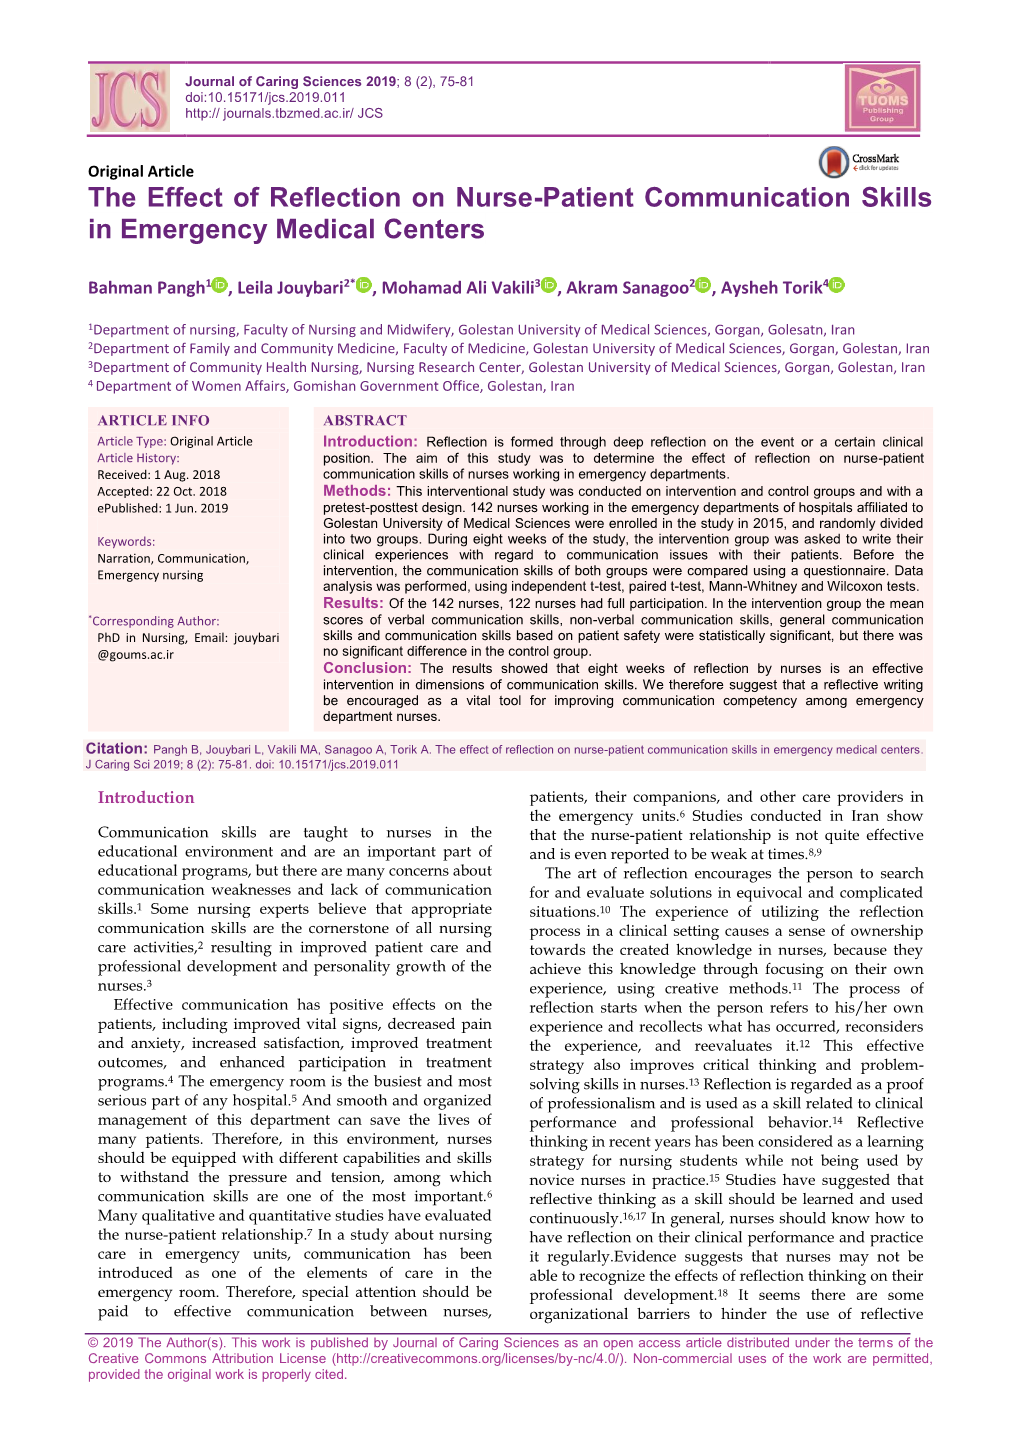 The Effect of Reflection on Nurse-Patient Communication Skills in Emergency Medical Centers